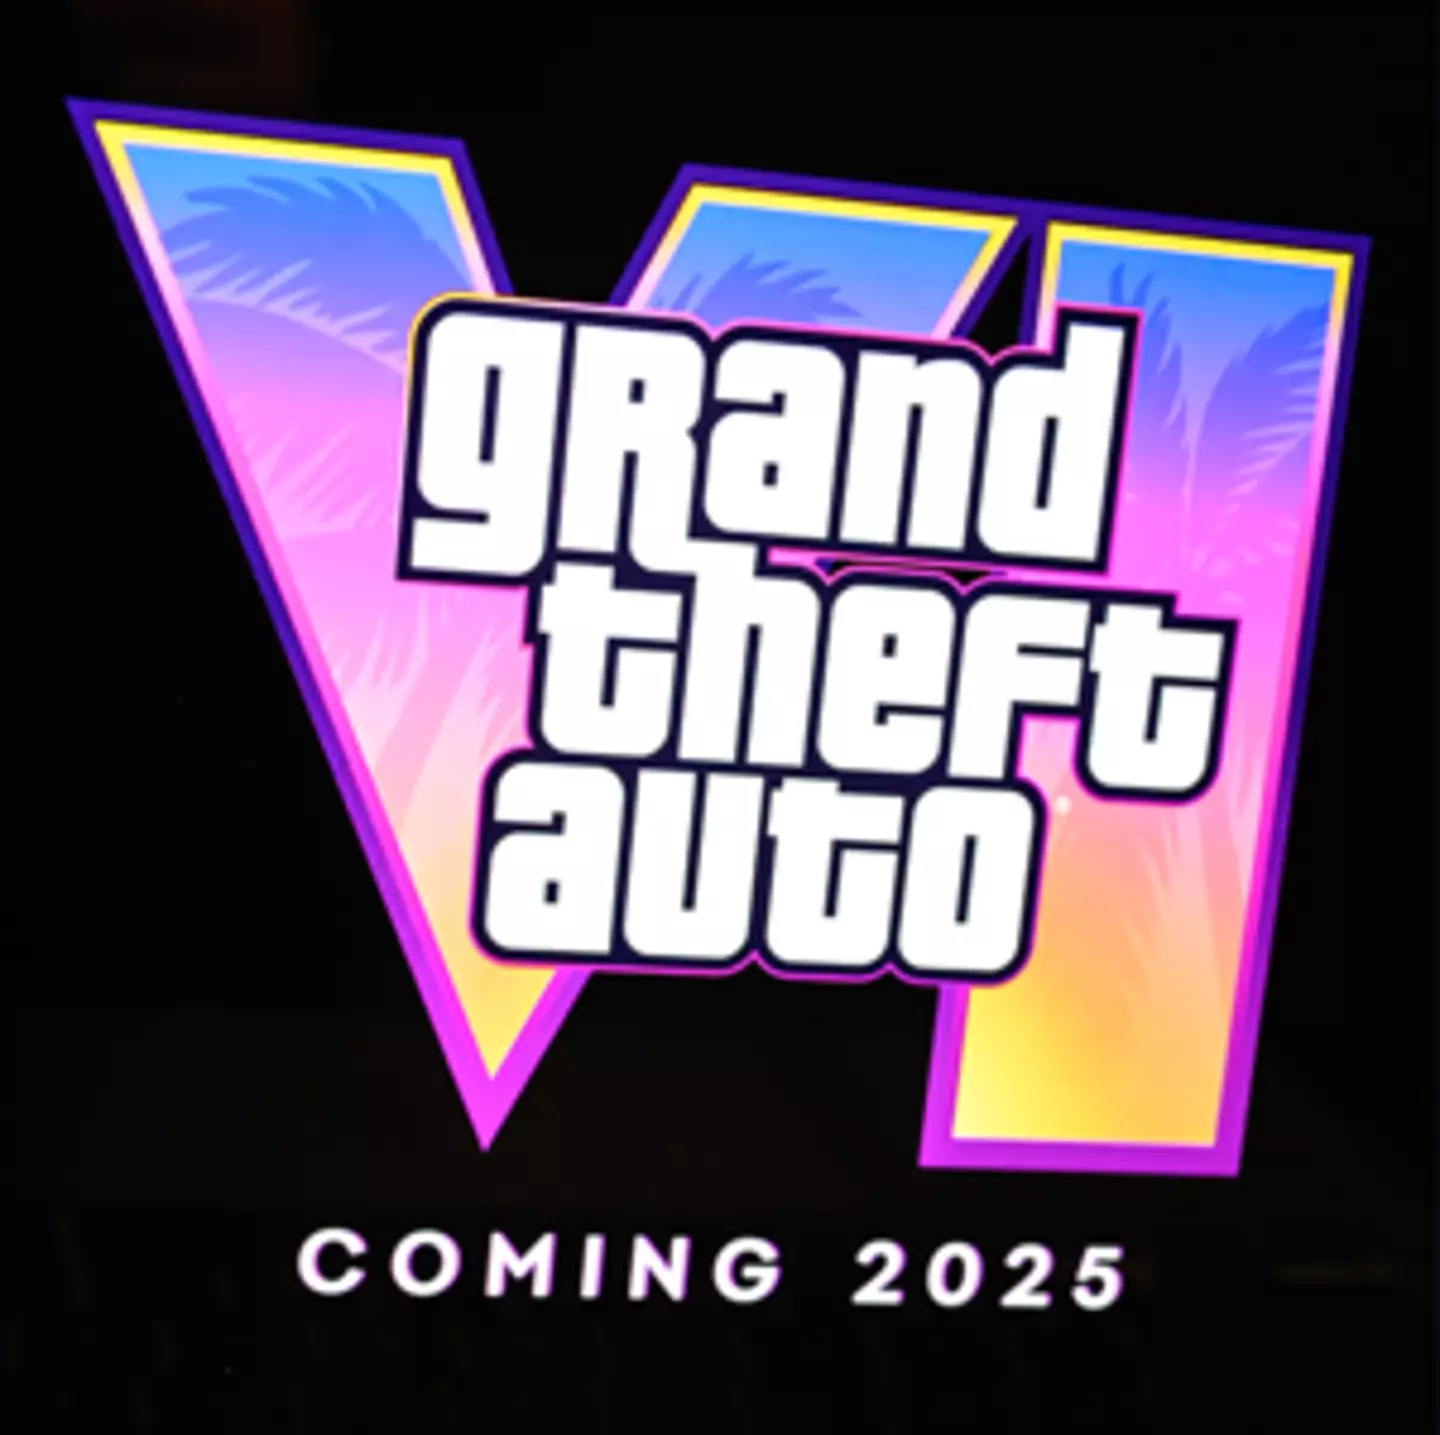 Job ad might have accidentally leaked GTA VI release date